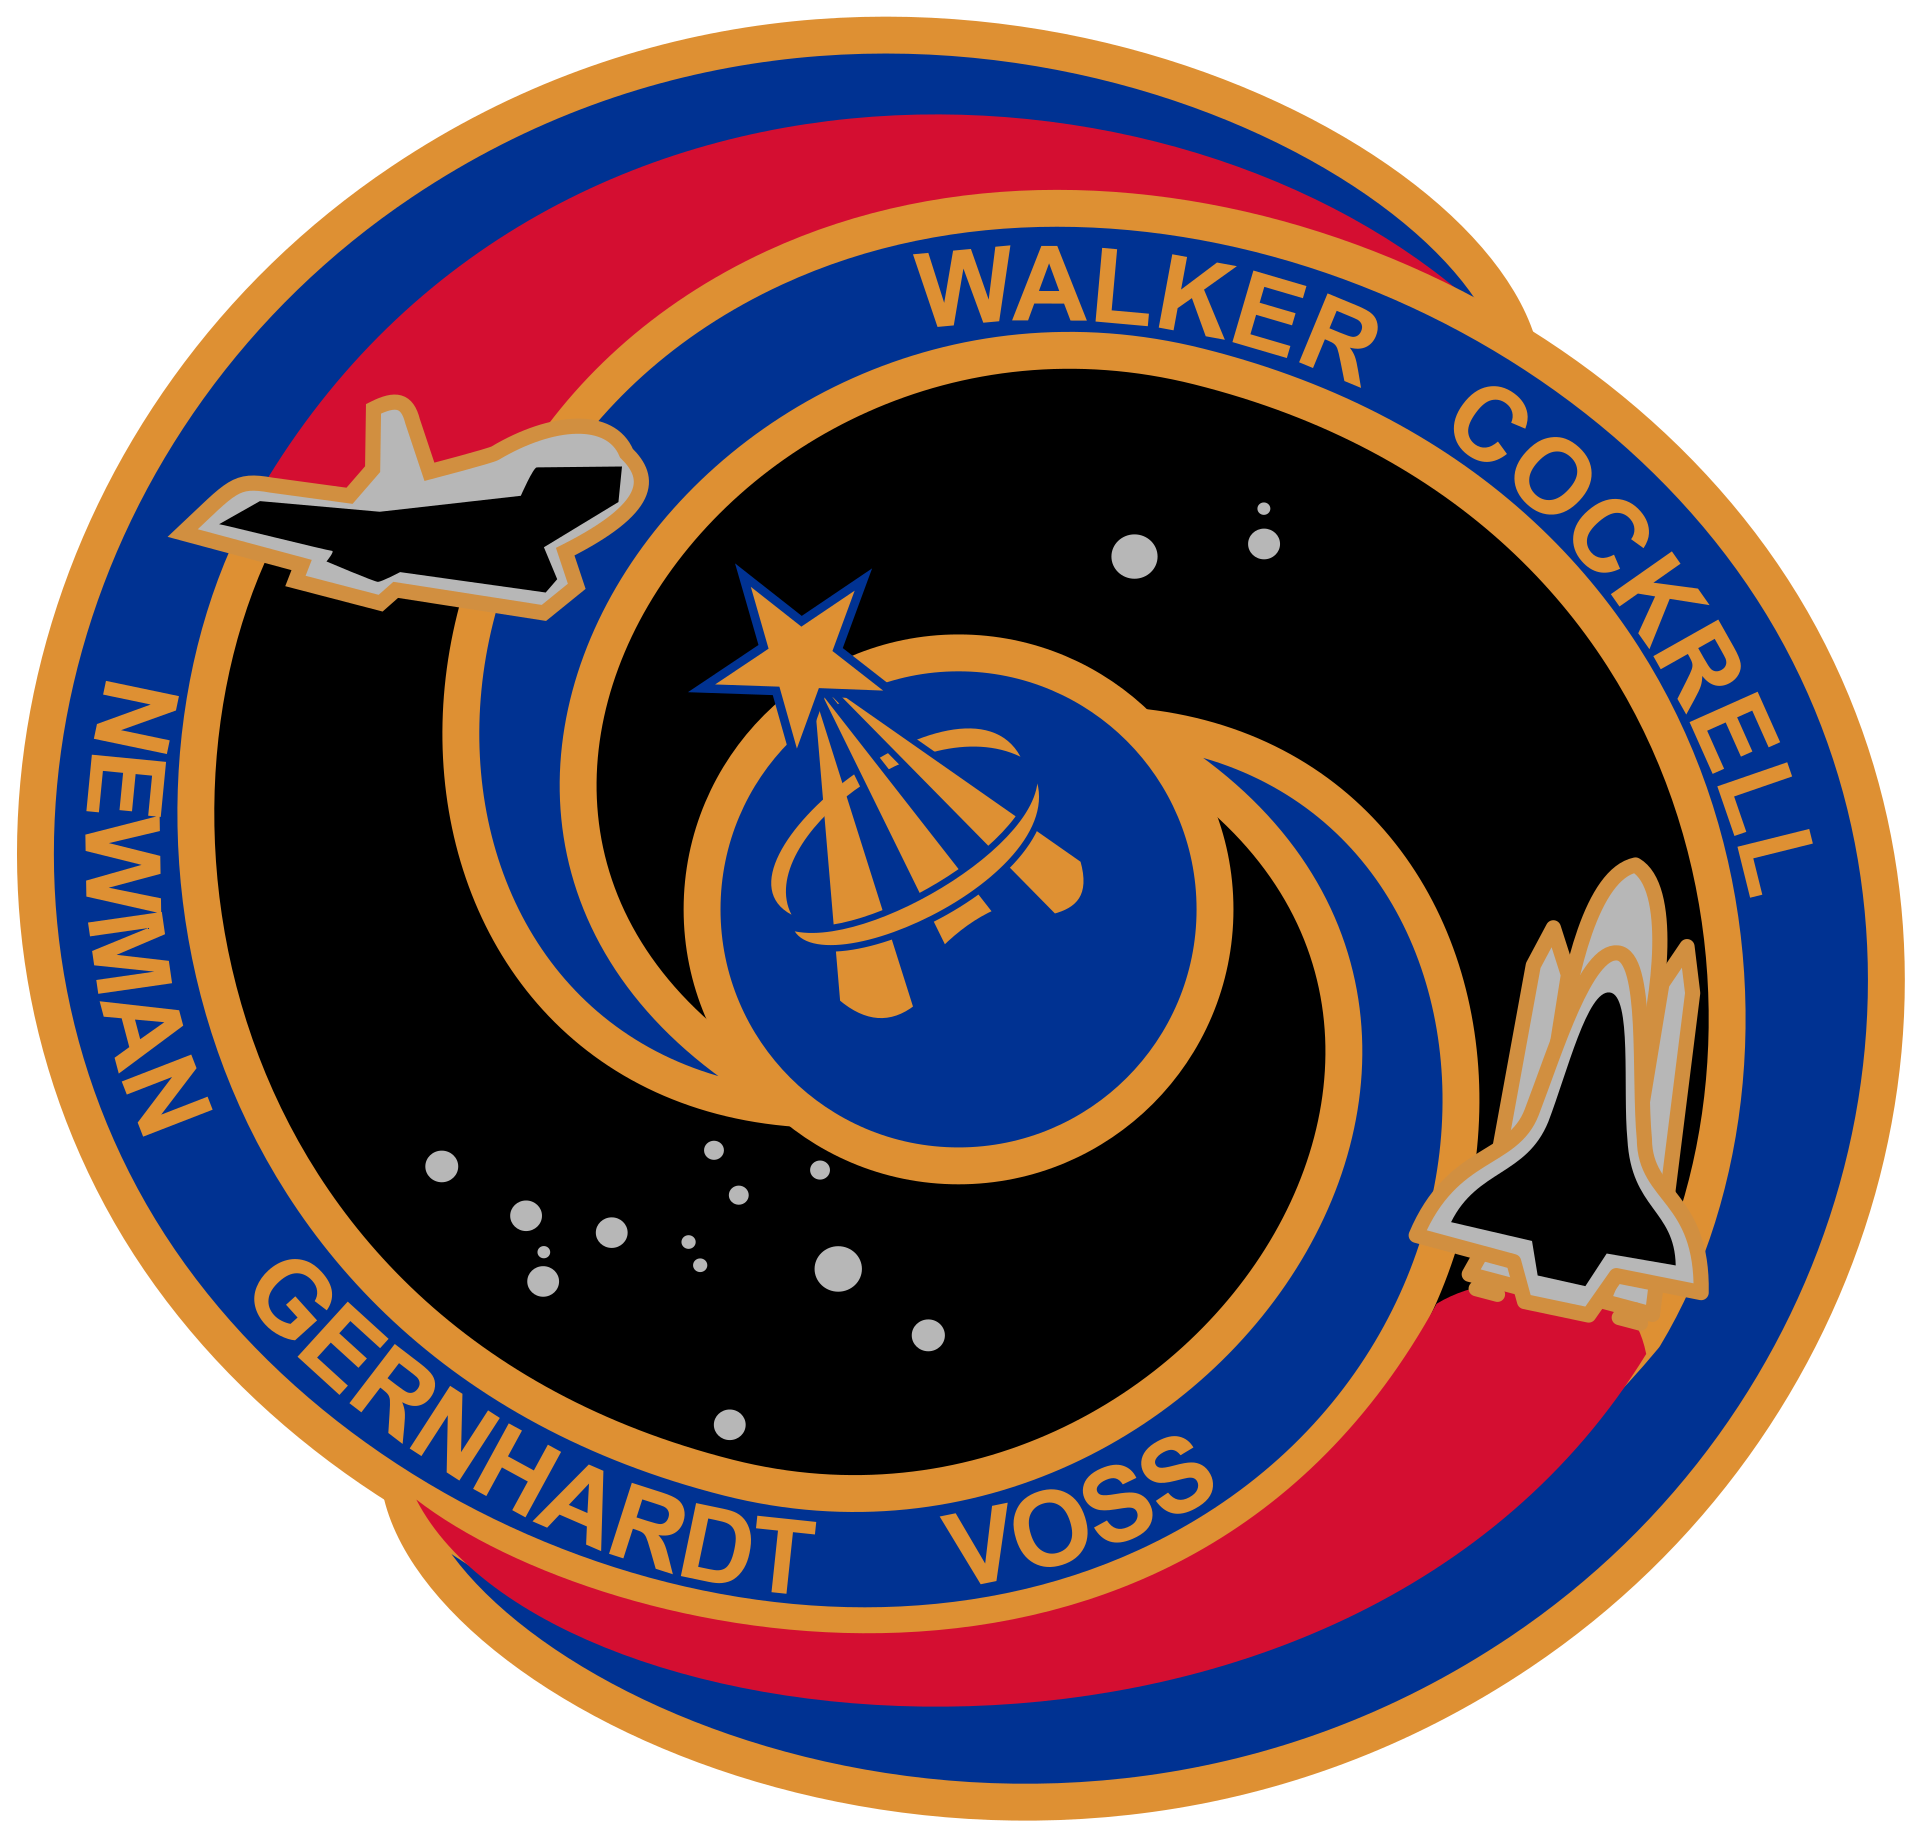 Mission patch for STS-69